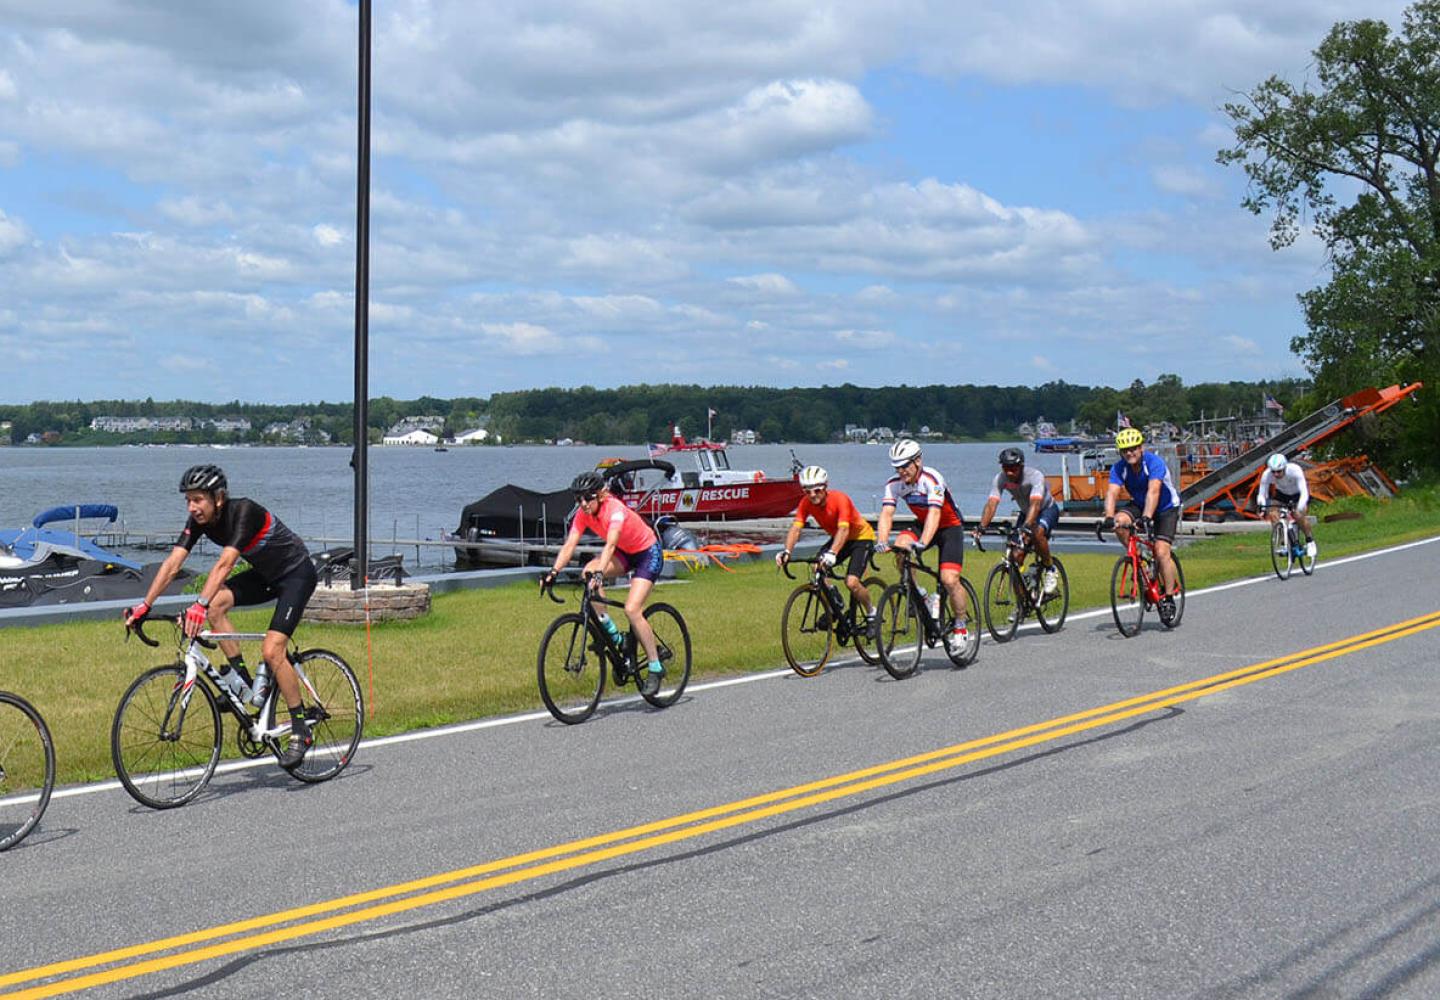 Saratoga Cycling Club is a great way to meet new friends and ride your bike.